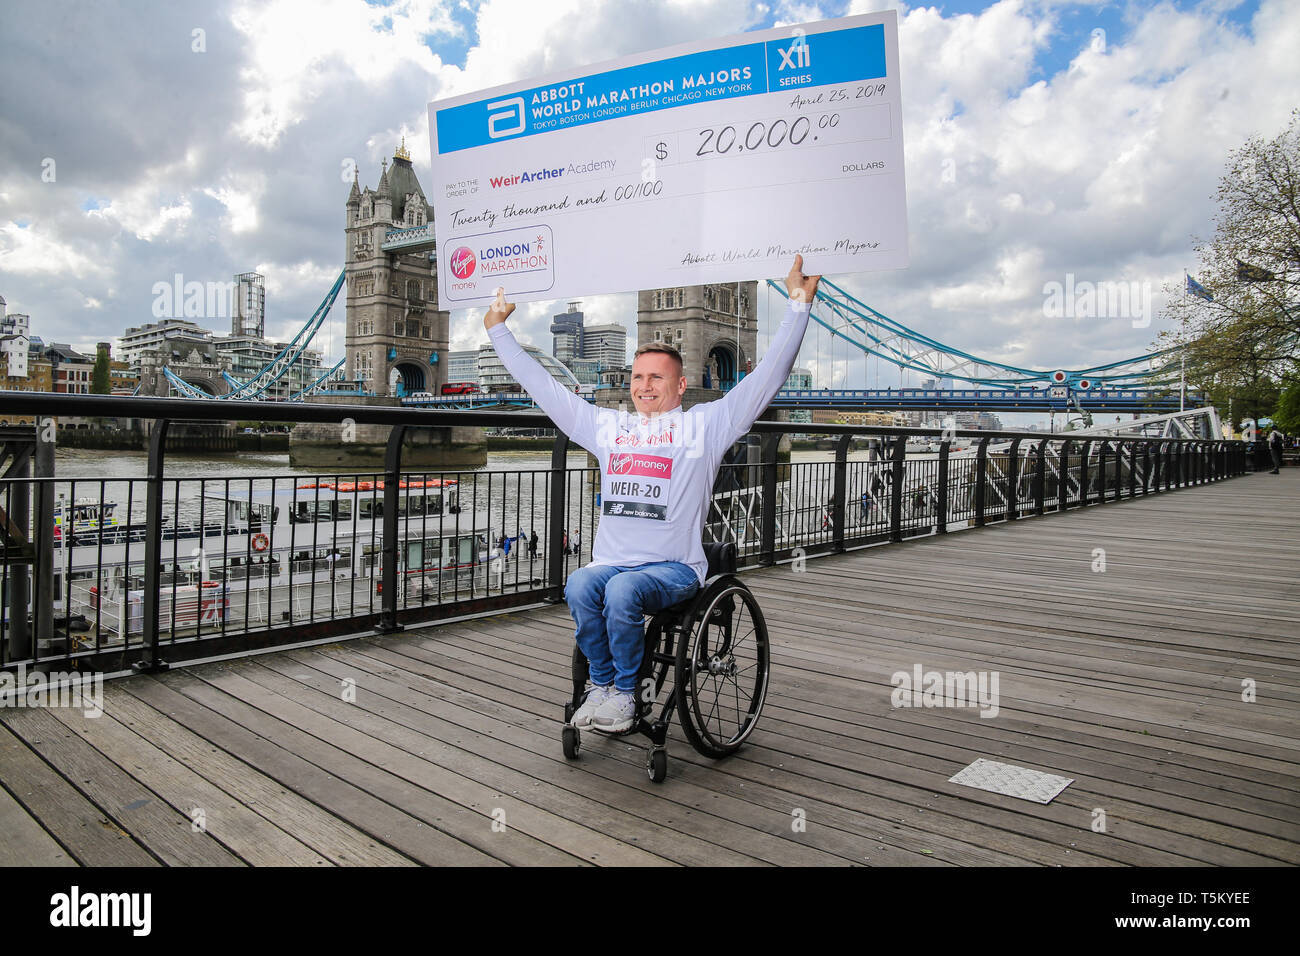 London, UK. 25th Apr, 2019. London Marathon 2019 Chris Miller, Divisional Vise President of Global Brand Strategy and Innovation with Michelle Weltman, Elite wheelchair athlete coordinator for Abbot World majors & London Marathon presenting David Weir with a 20000 thousands dollars check marking the 20th year of the London Marathon for David Weir  Credit: Paul Quezada-Neiman/Alamy Live News Stock Photo